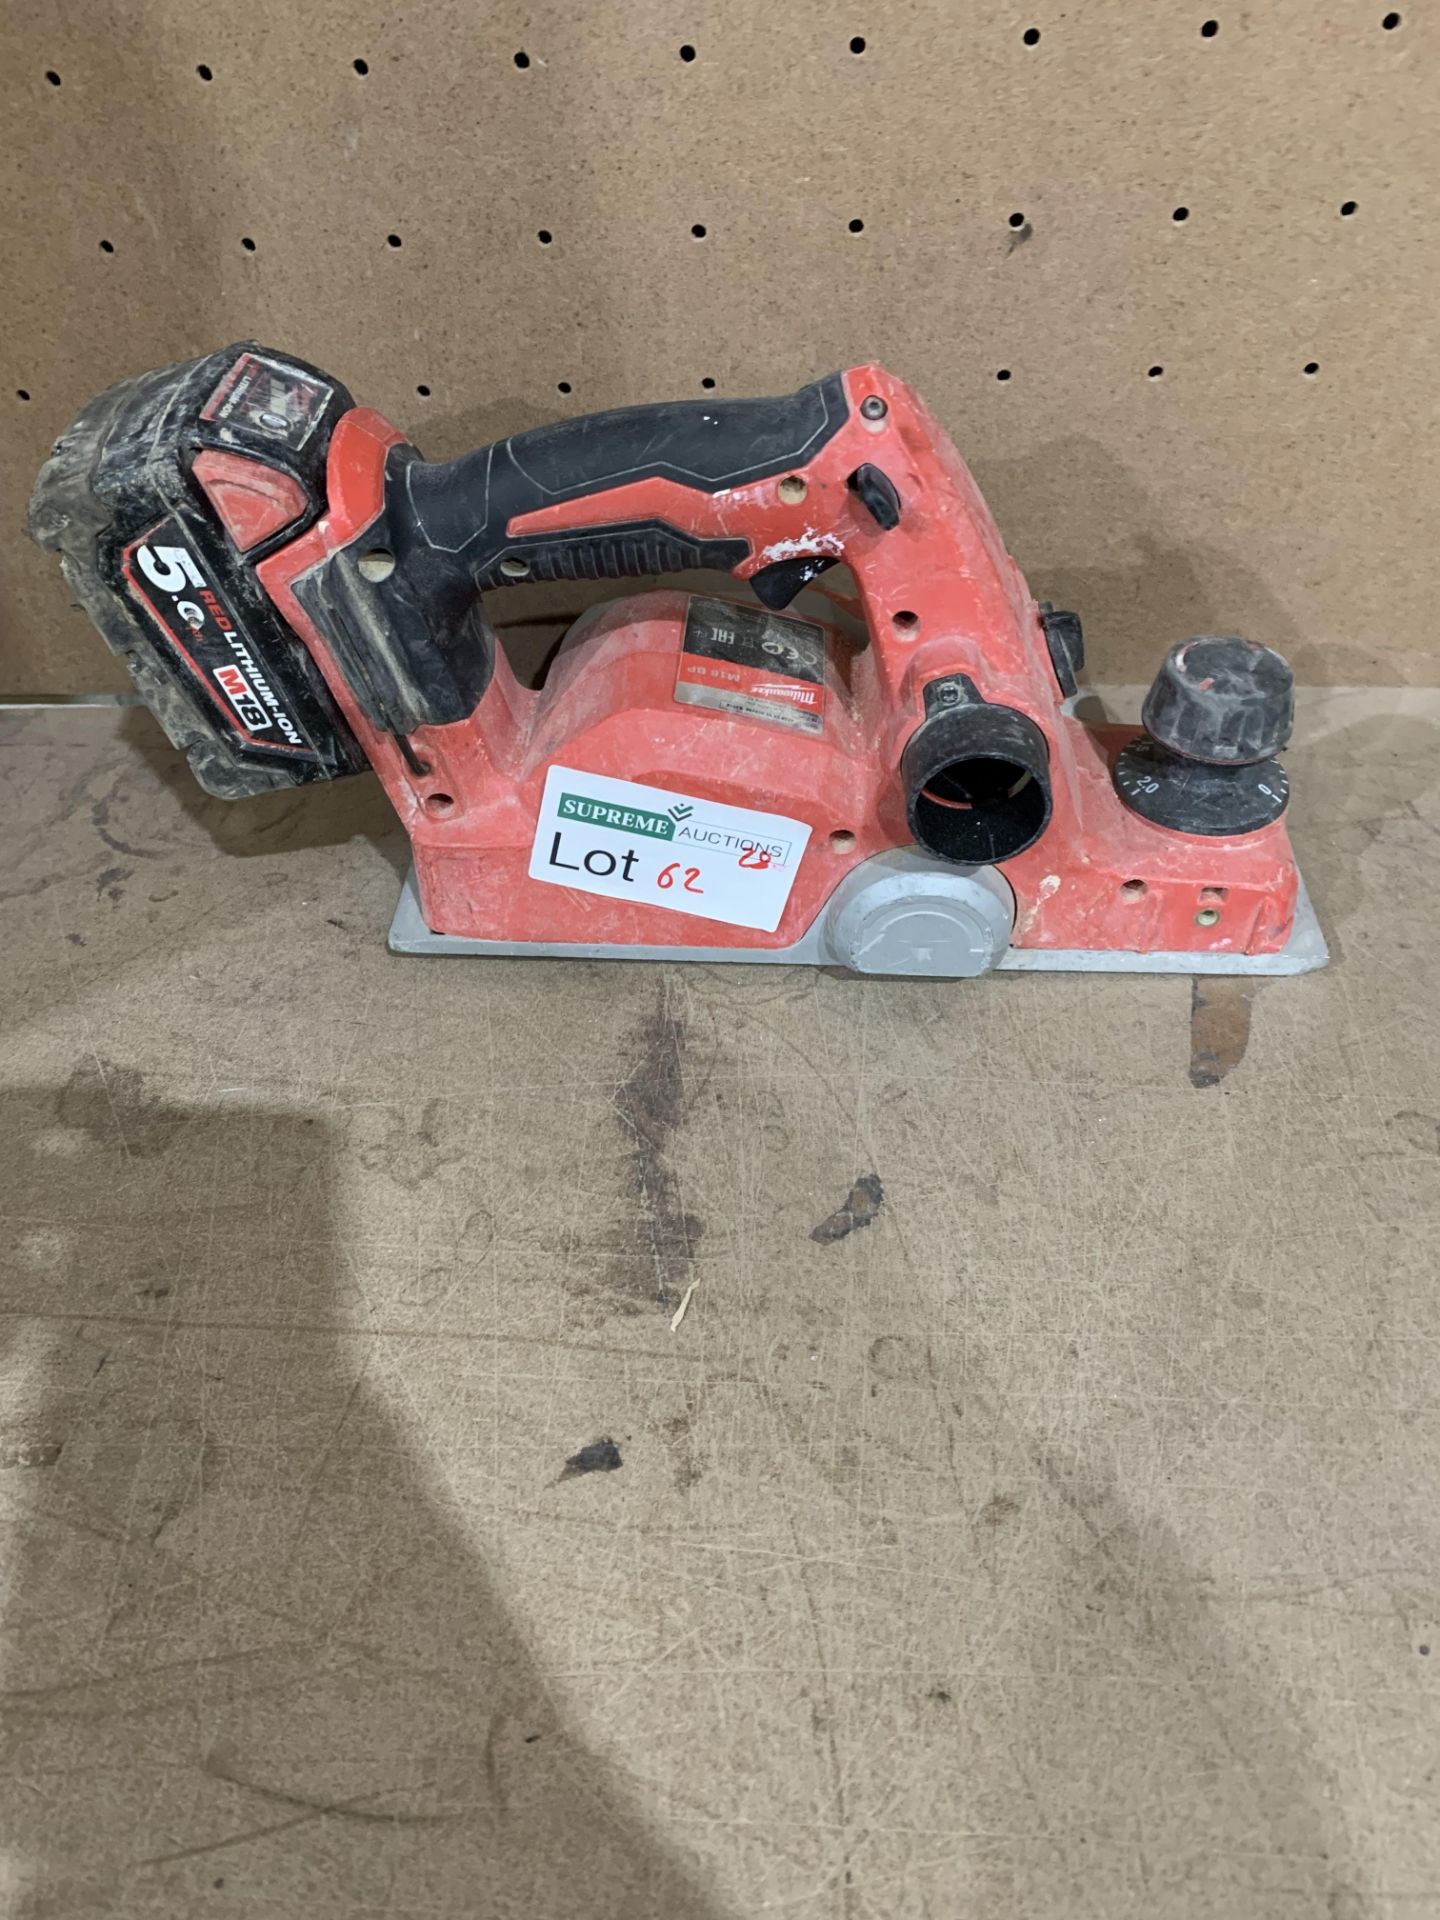 MILWAUKEE M18 BP-0 18V LI-ION CORDLESS PLANER COMES WITH BATTERY (UNCHECKED, UNTESTED)